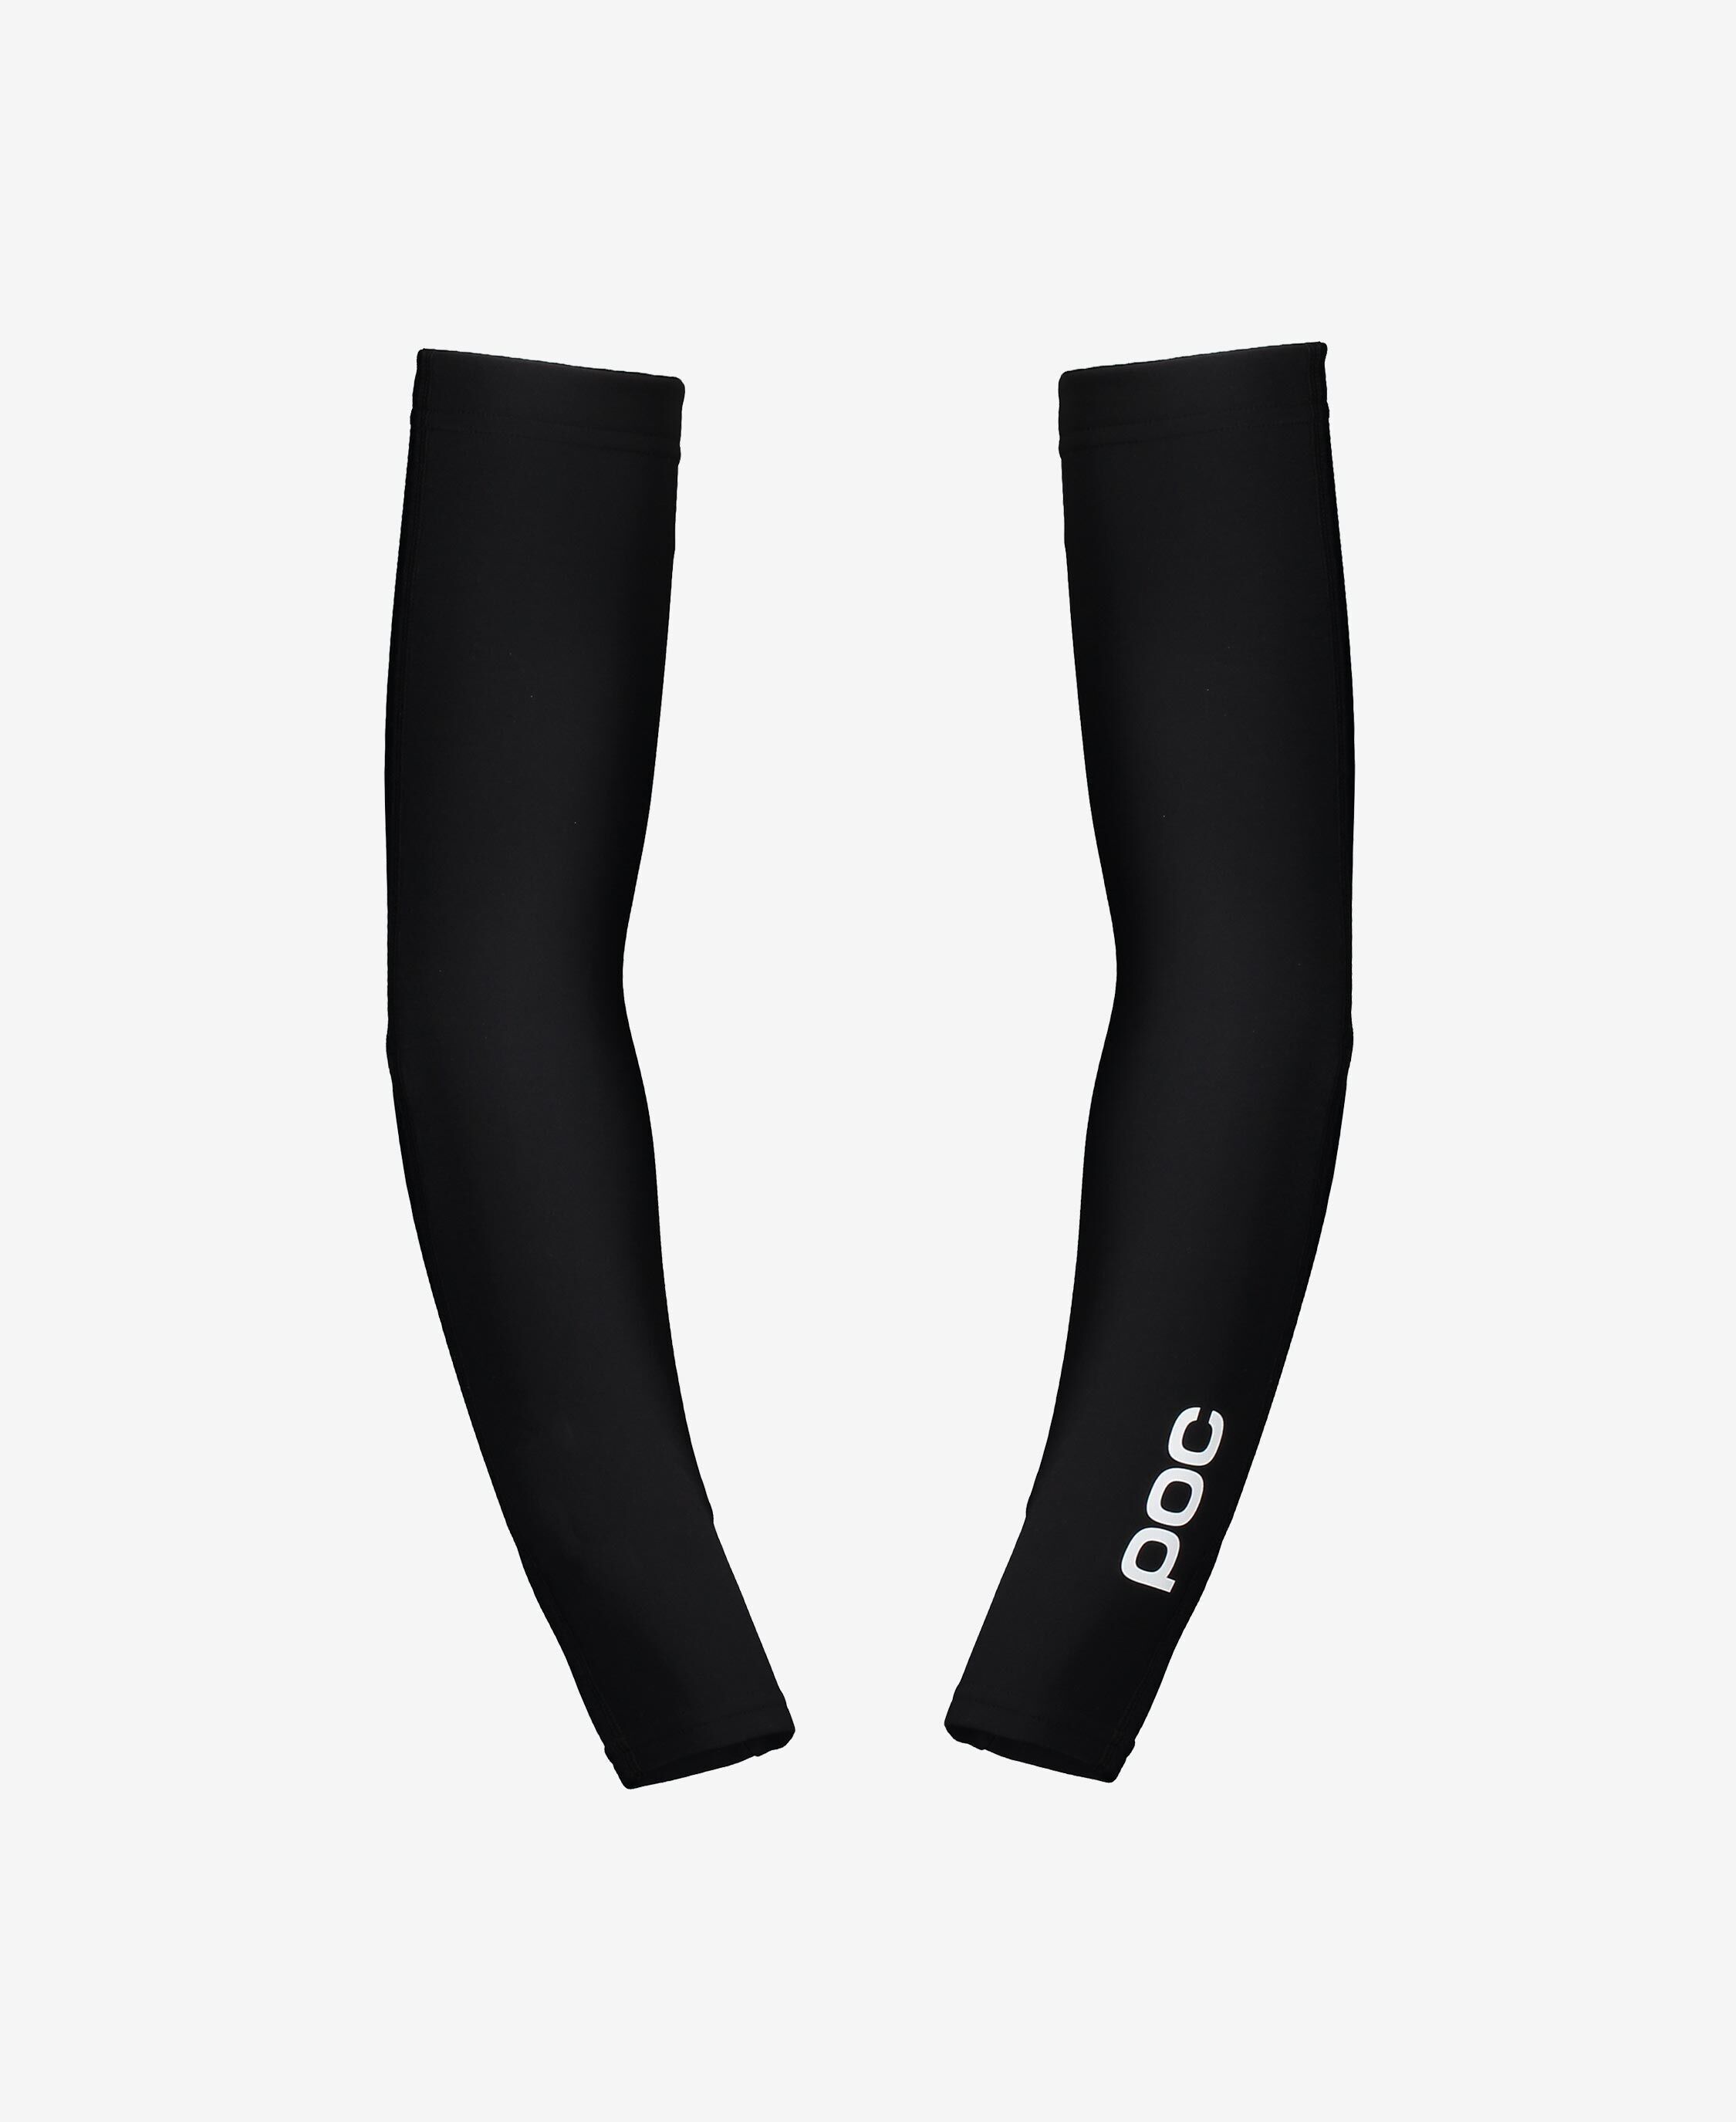 Poc Thermal Sleeves - Cycling arm warmers